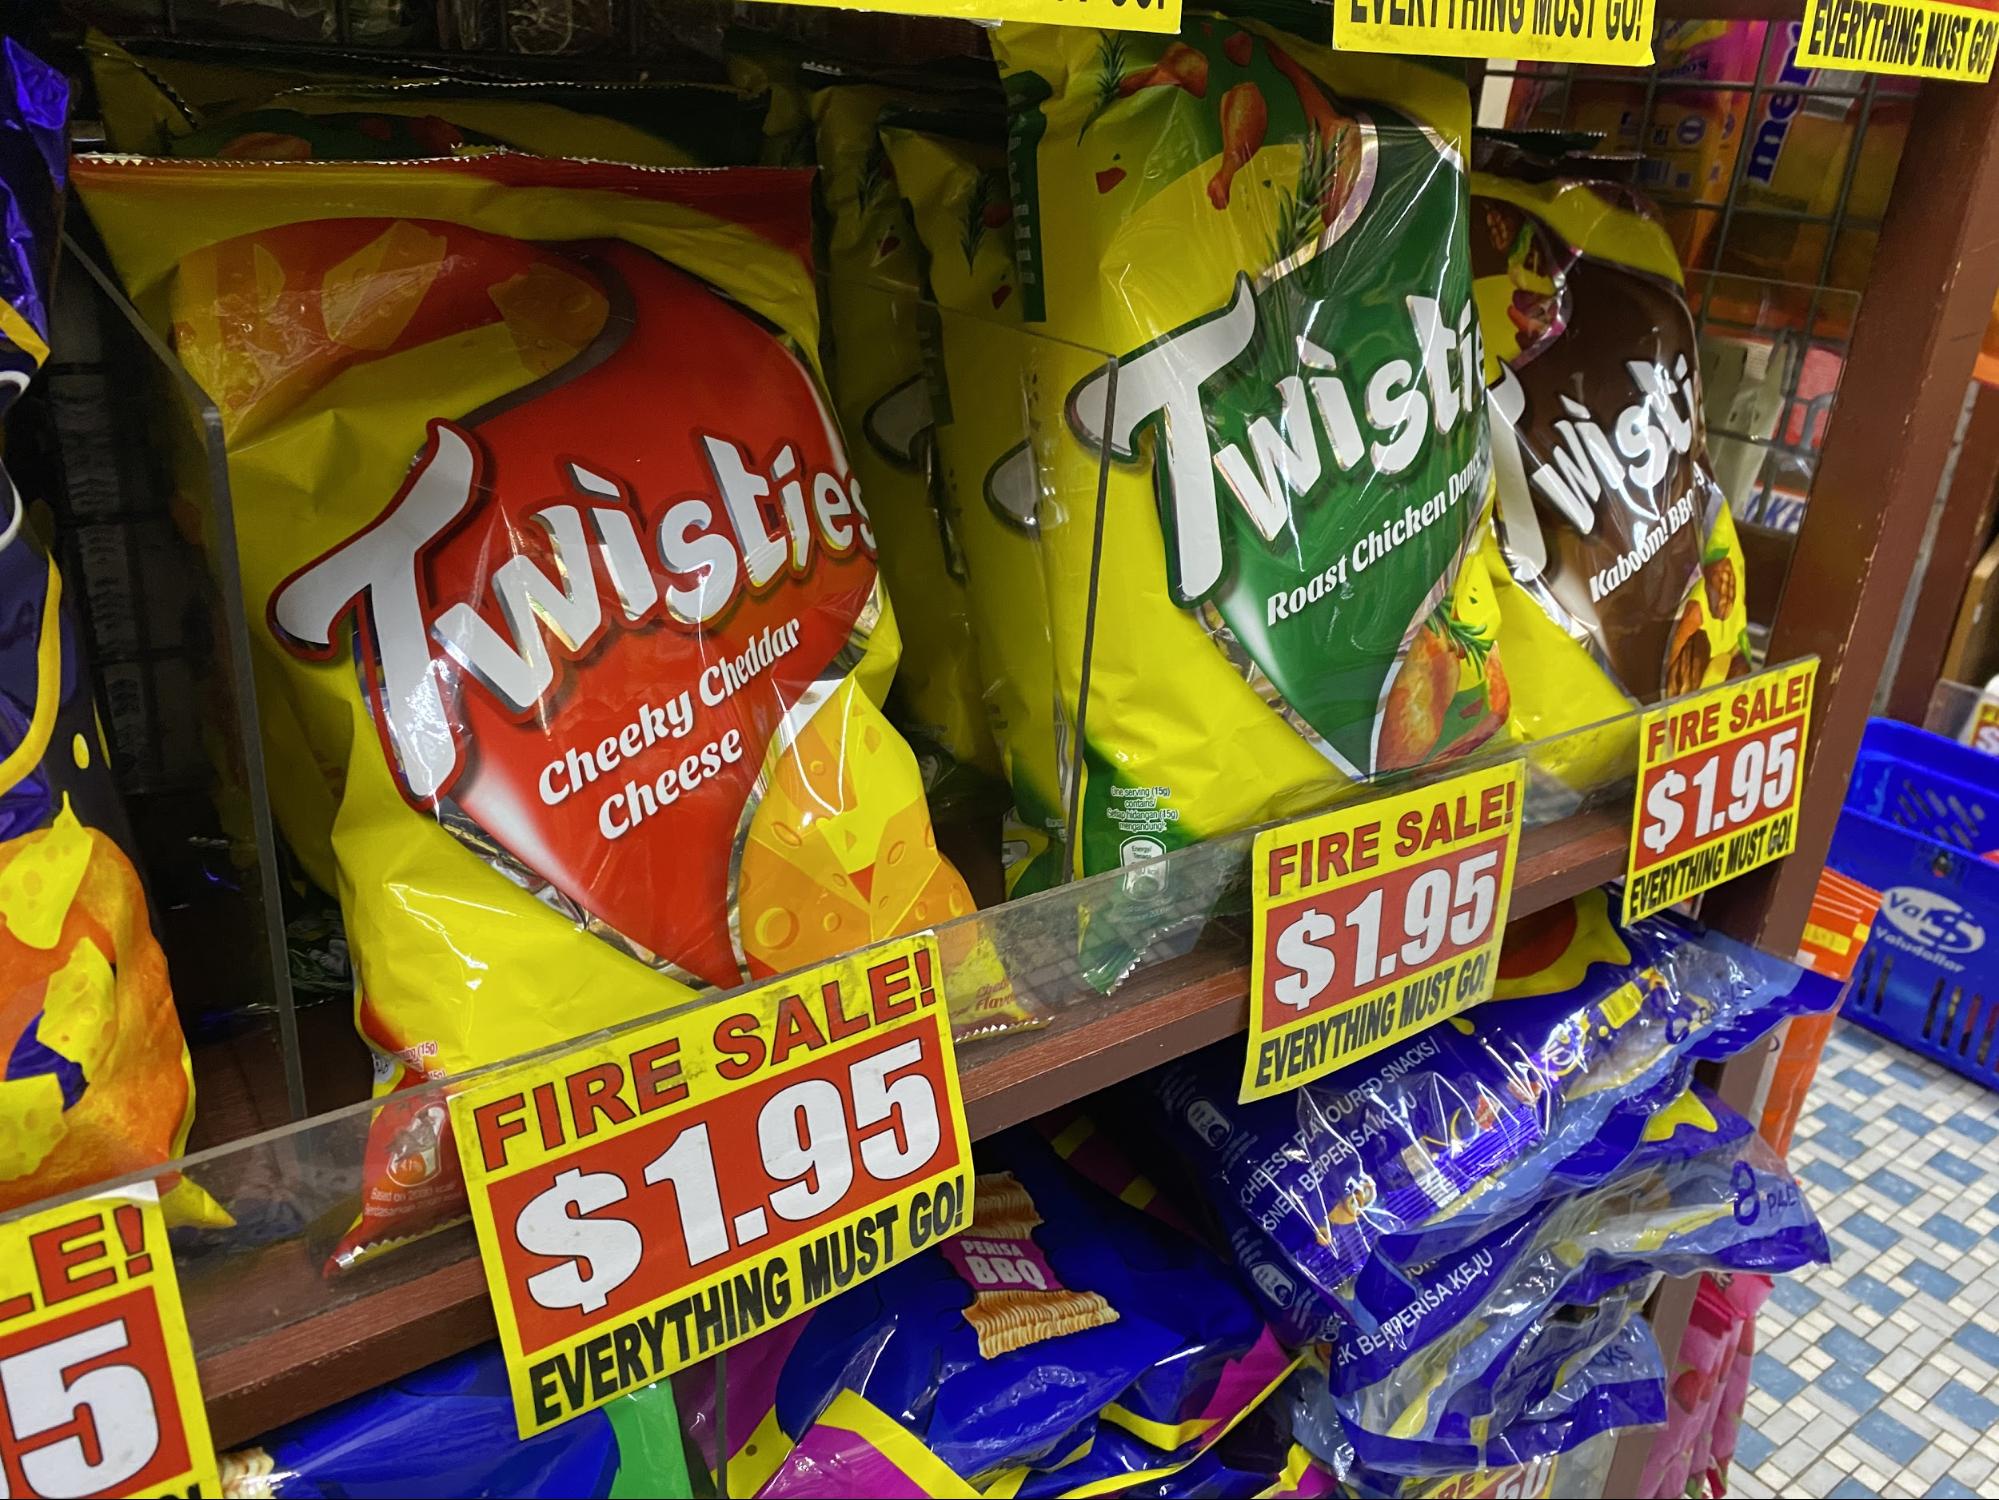 Twisties at the value dollar store in Singapore